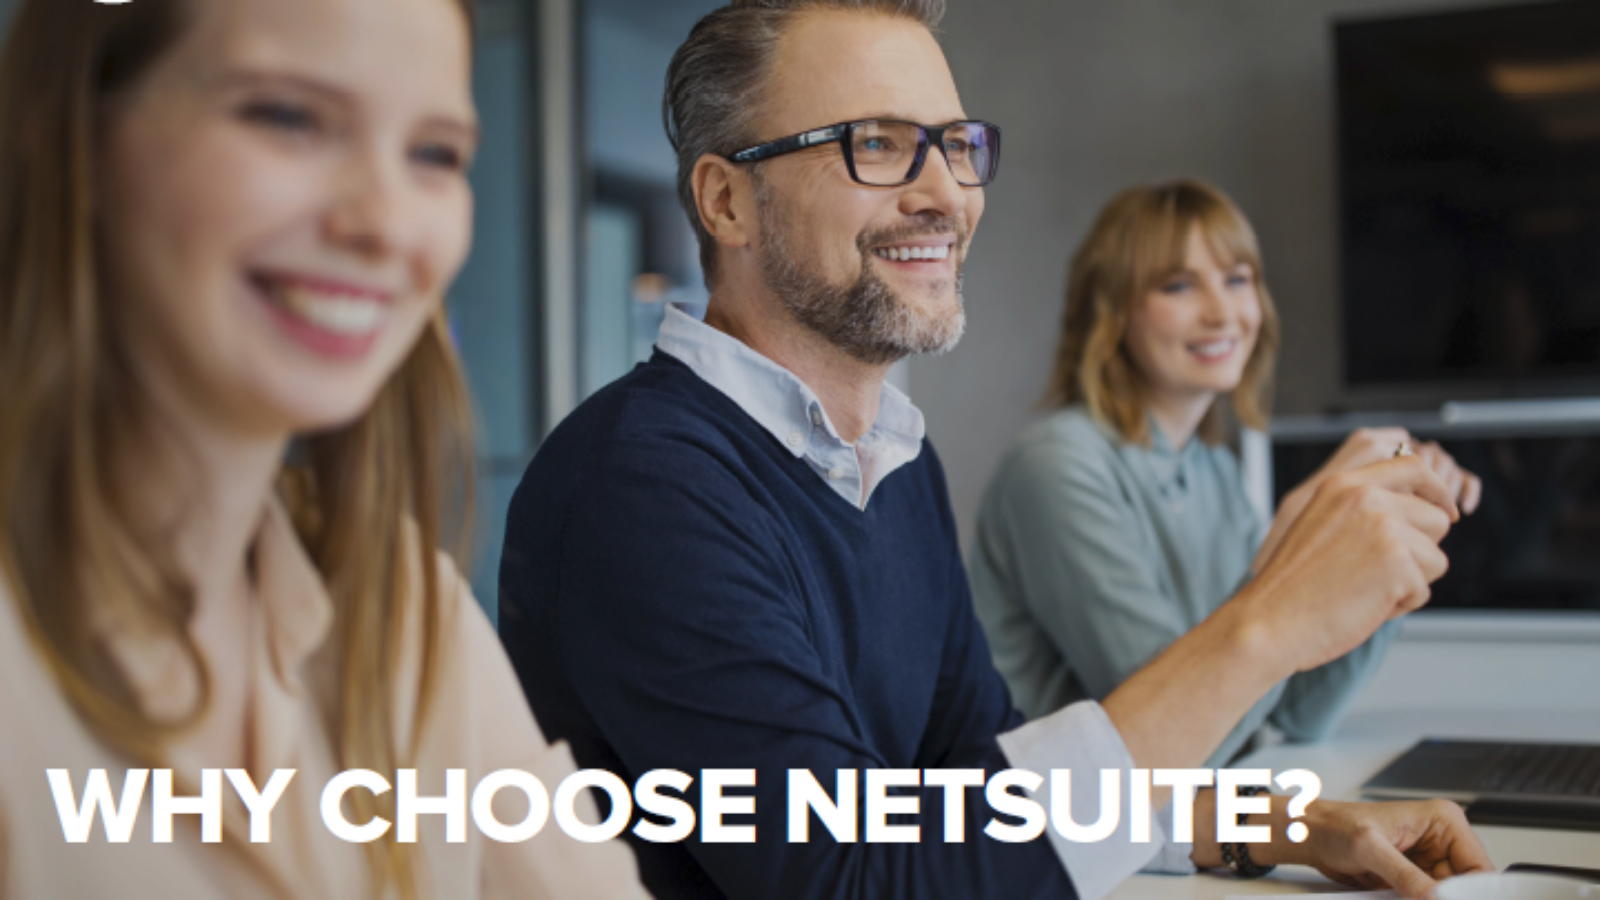 Why choose NetSuite?